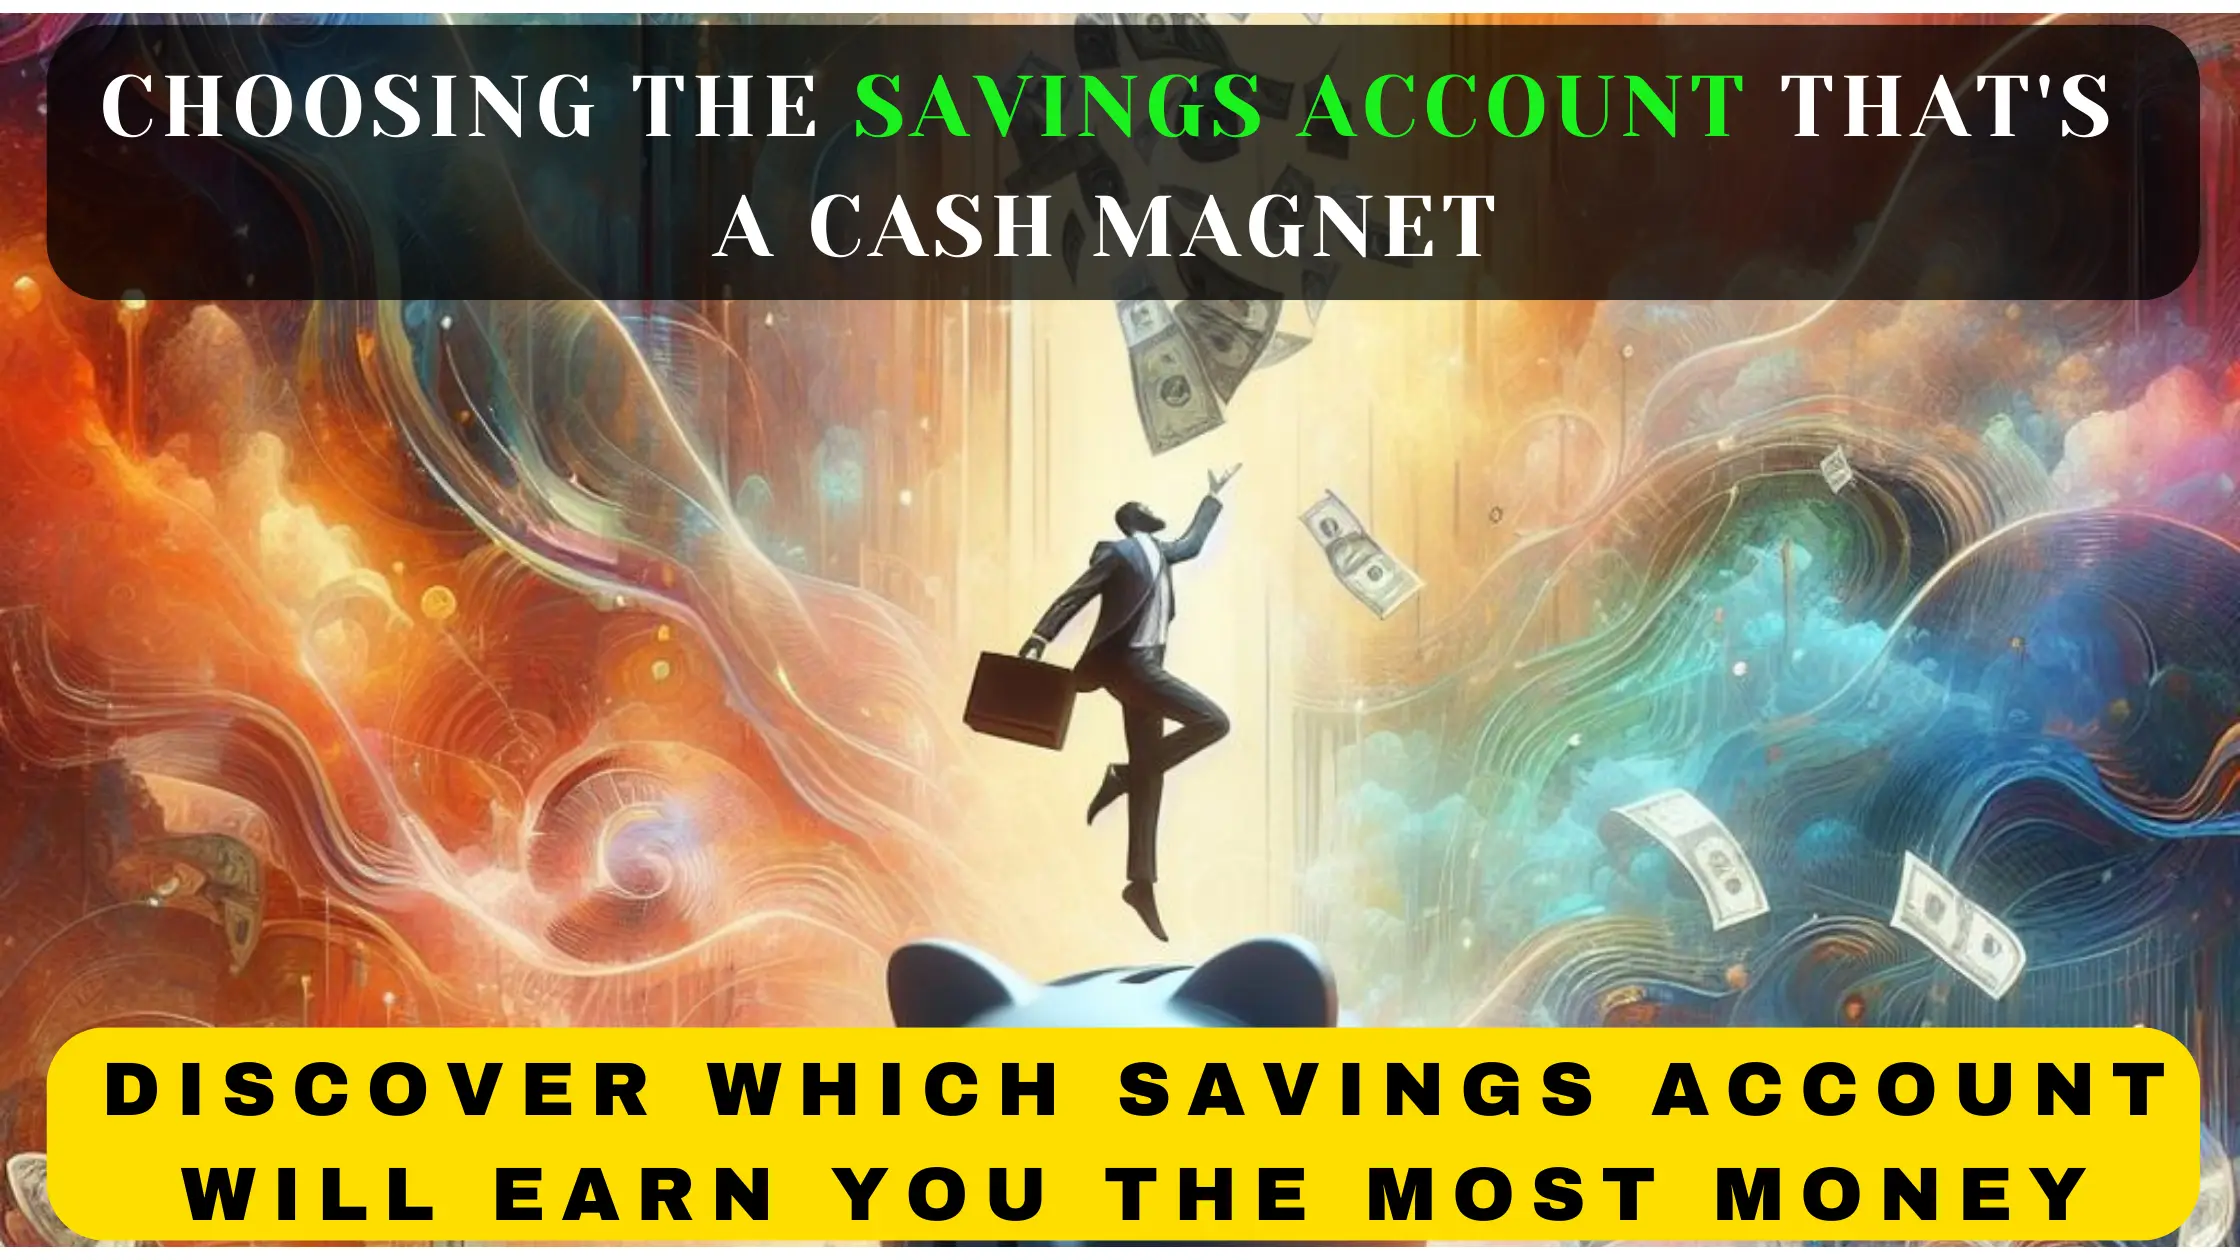 Which Savings Account Will Earn You the Most Money